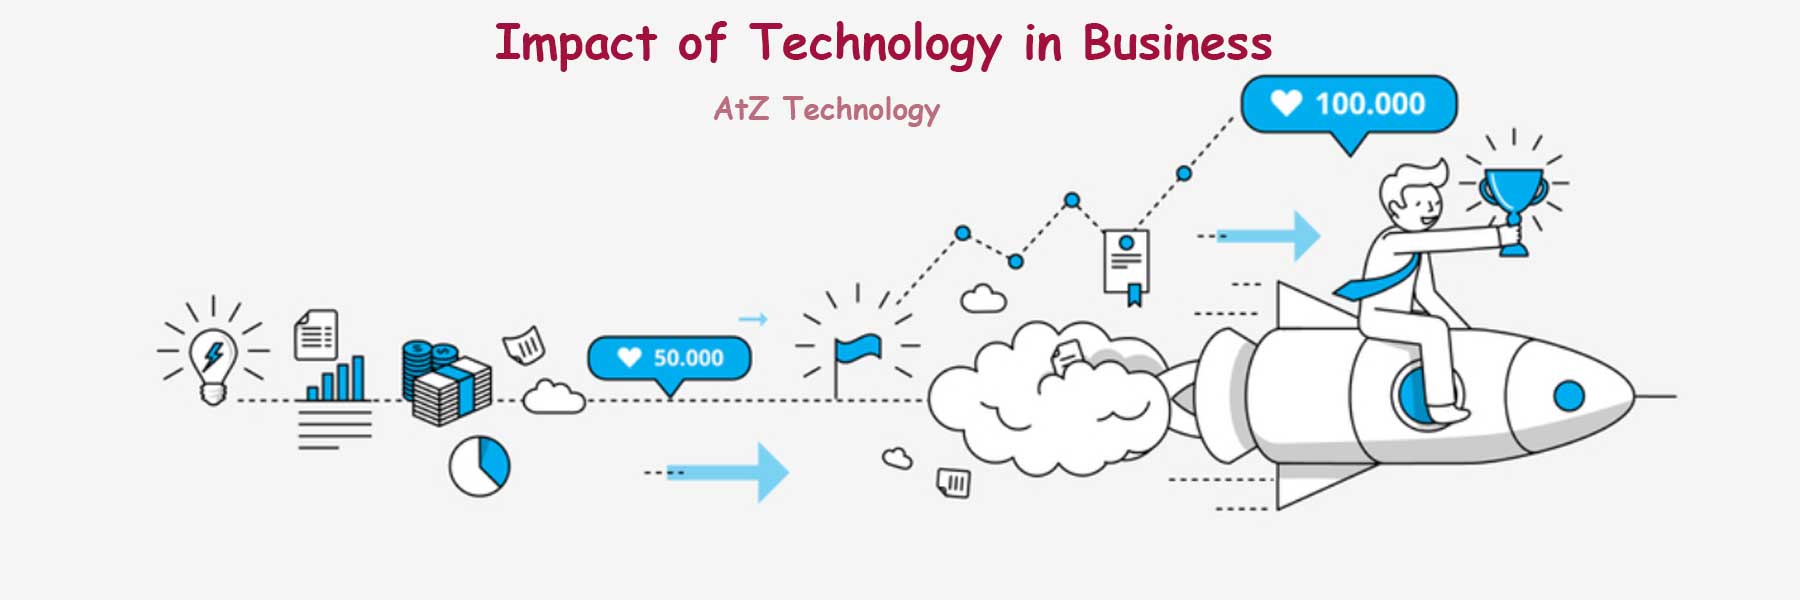 Impact of Technology in Business